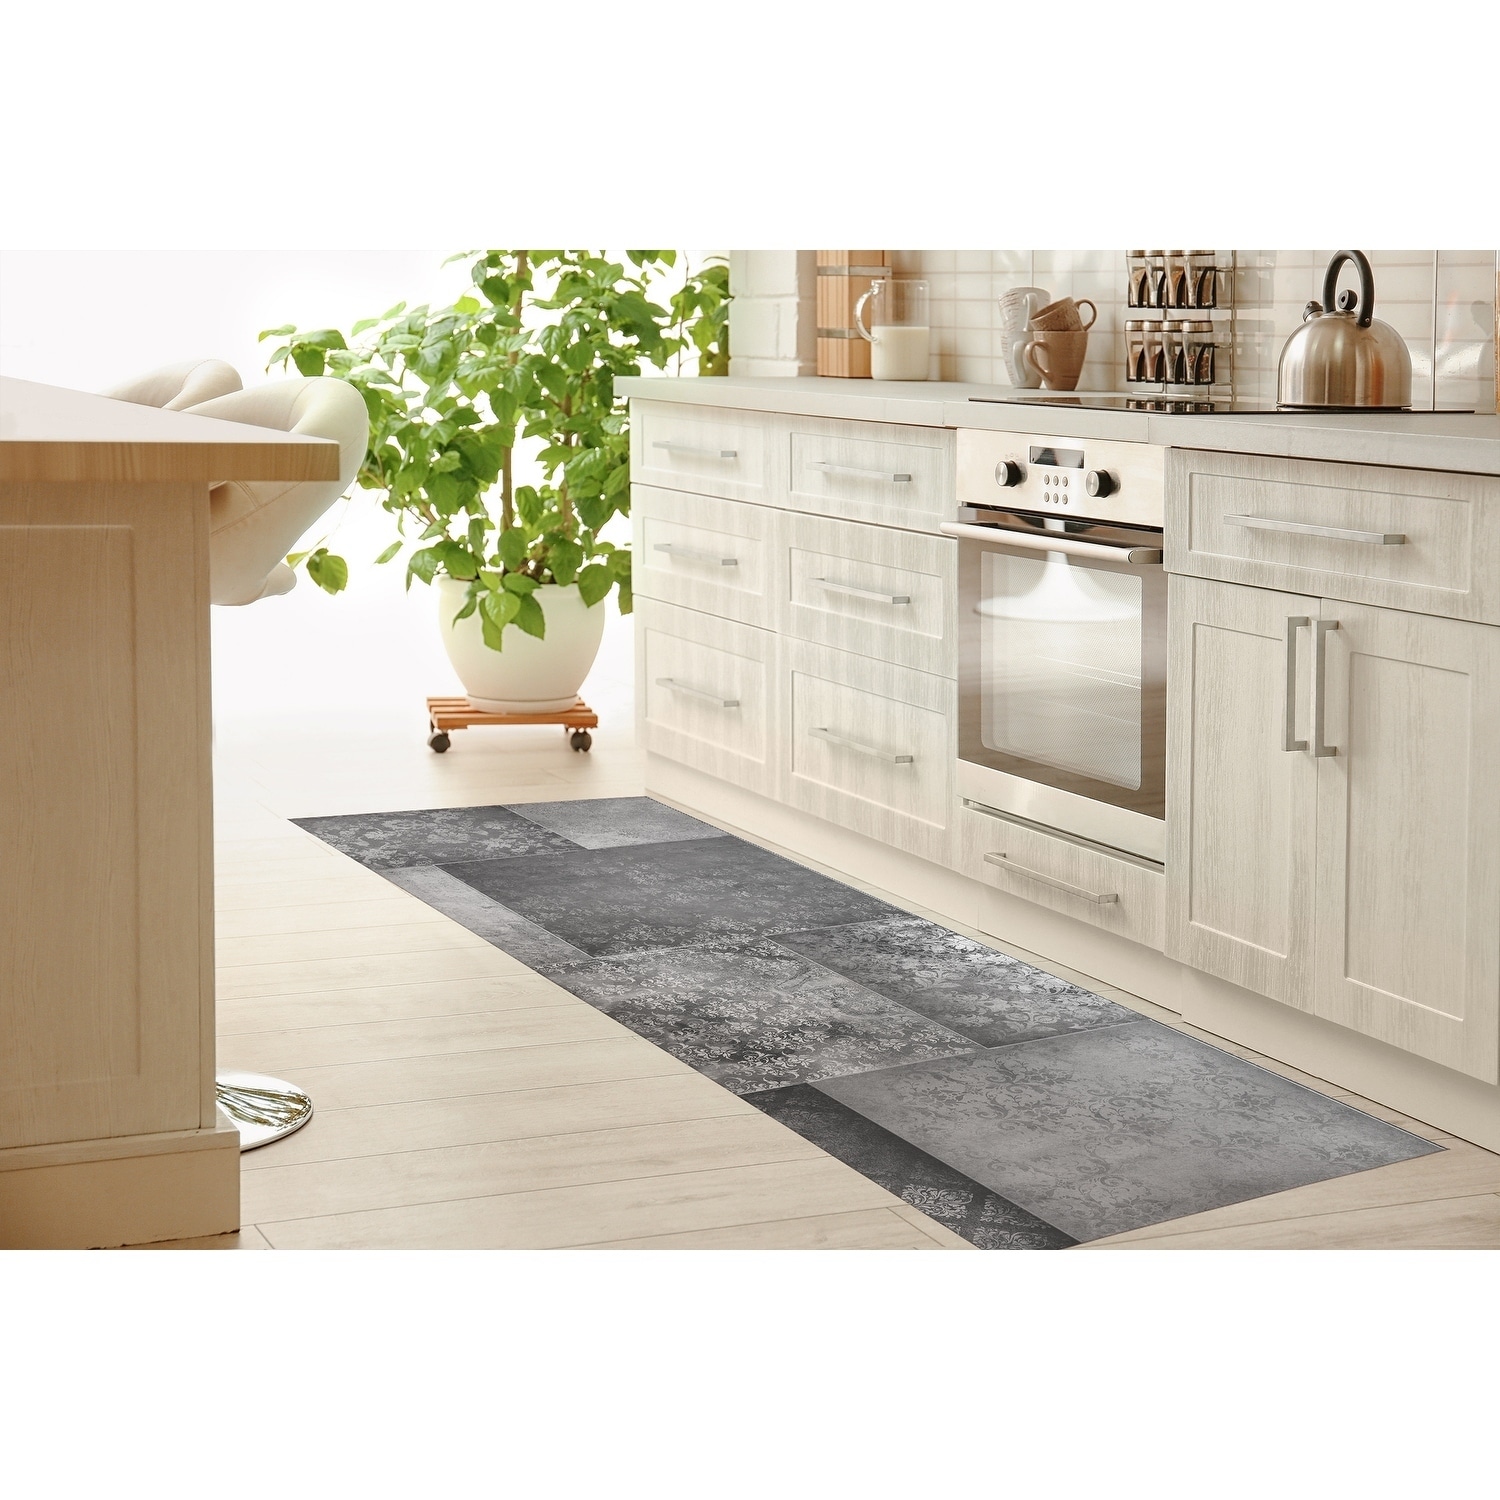 Details about   20"x59" Laundry Room Runner Rug Kitchen Mat Stain Resistant Non-Slip Rubber Back 